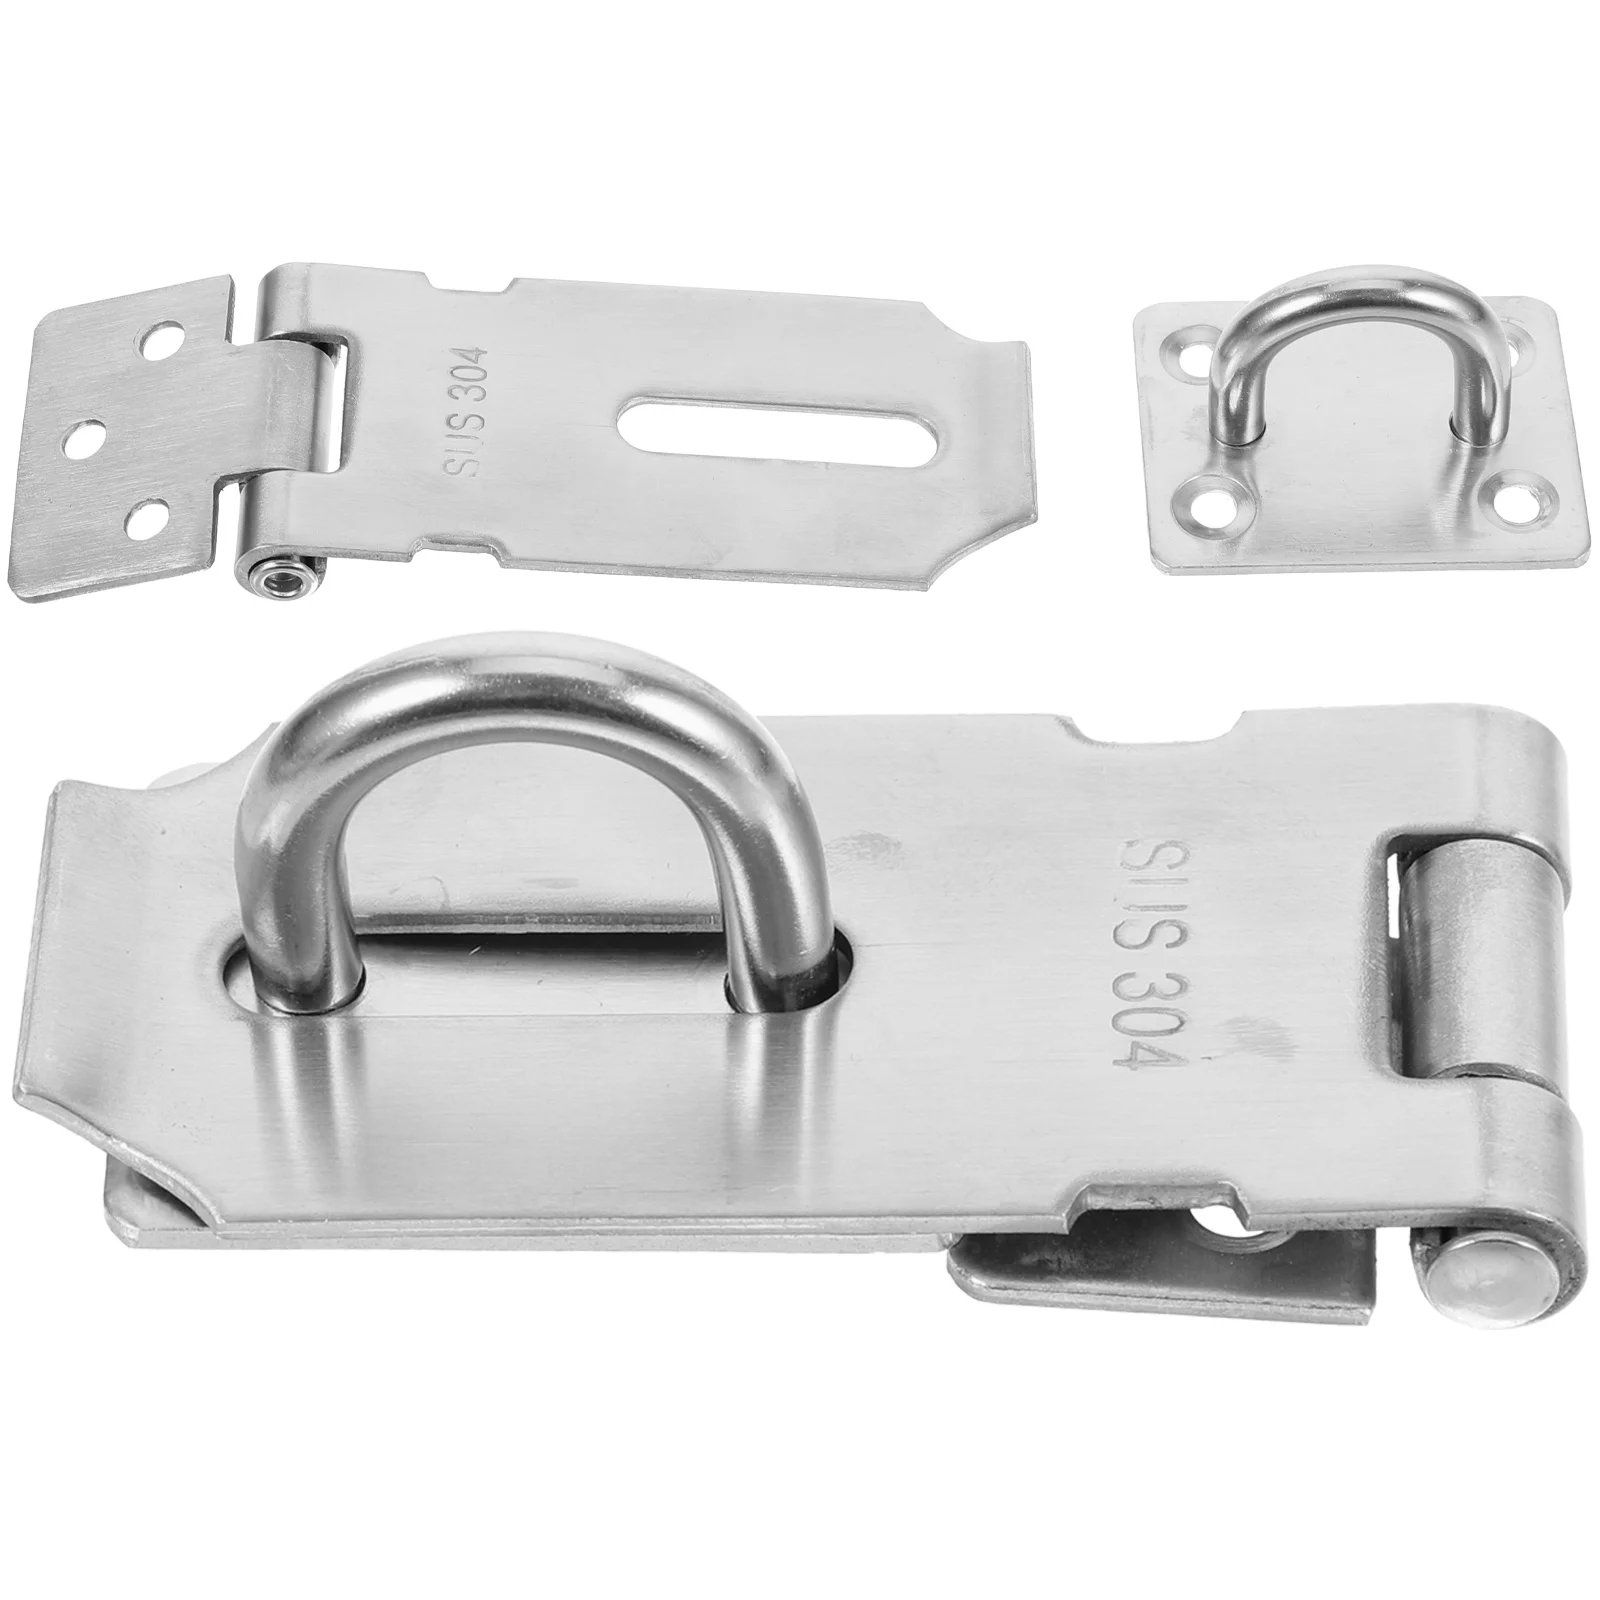 

Stainless Steel Door Buckle Shed Latch Latches Hardware Hasp for Lock outside Padlock Locks Doors